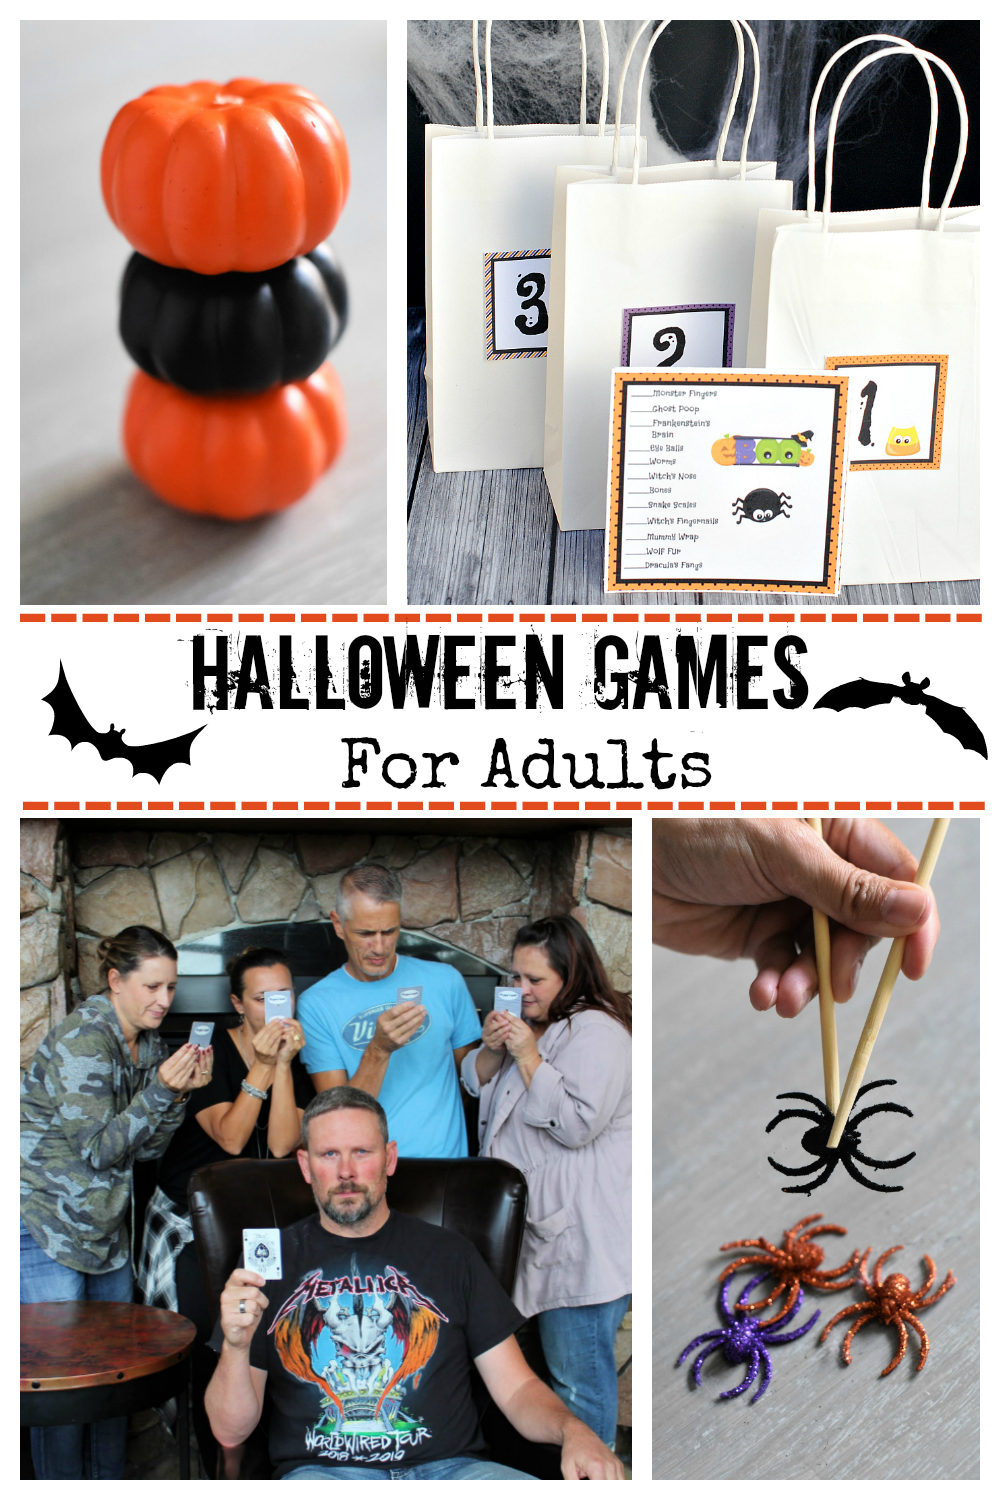 Fun Halloween Games for Adults. These Halloween games are perfect for your next Halloween party! Fun, simple Halloween games. #Halloweengames #AdultHalloweengames #fungames #funHalloweengames